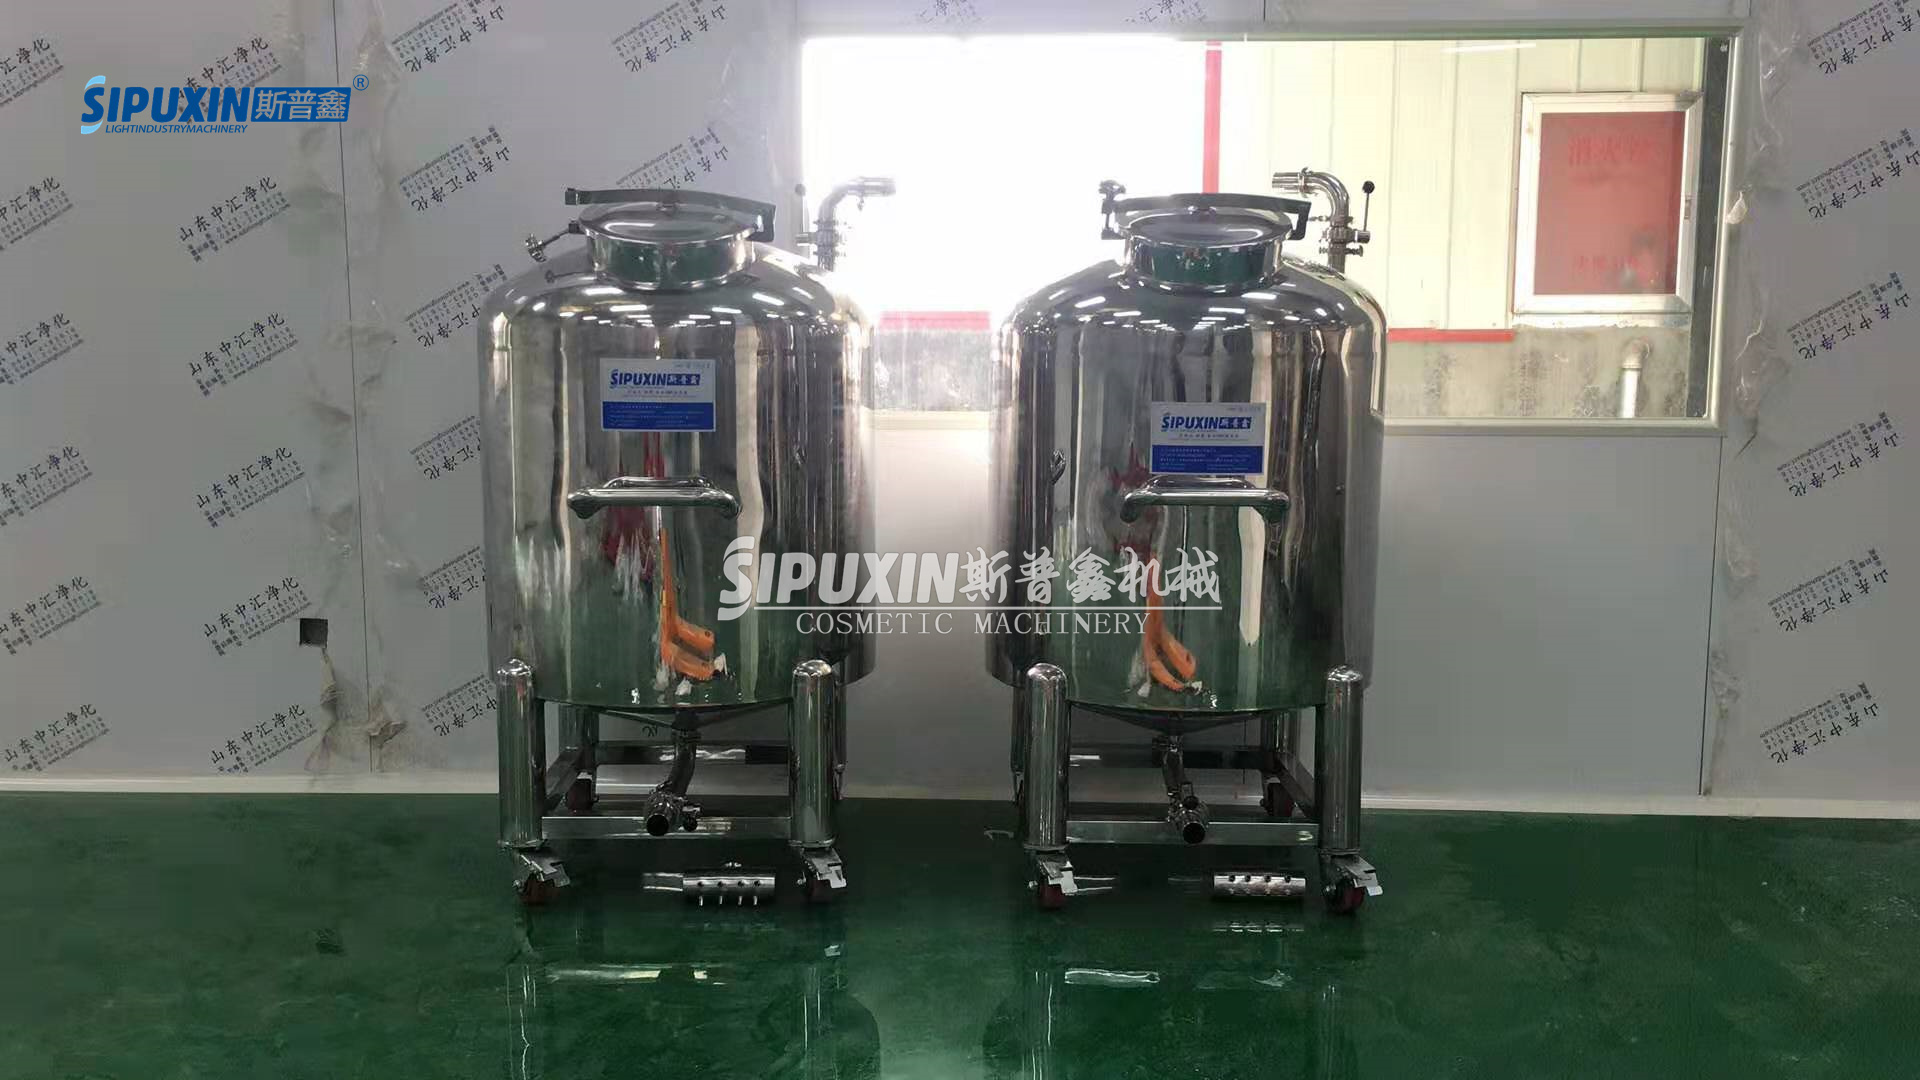 Sipuxin Large Fixed Emulsifier Machine Combination For Industrial Engineering 